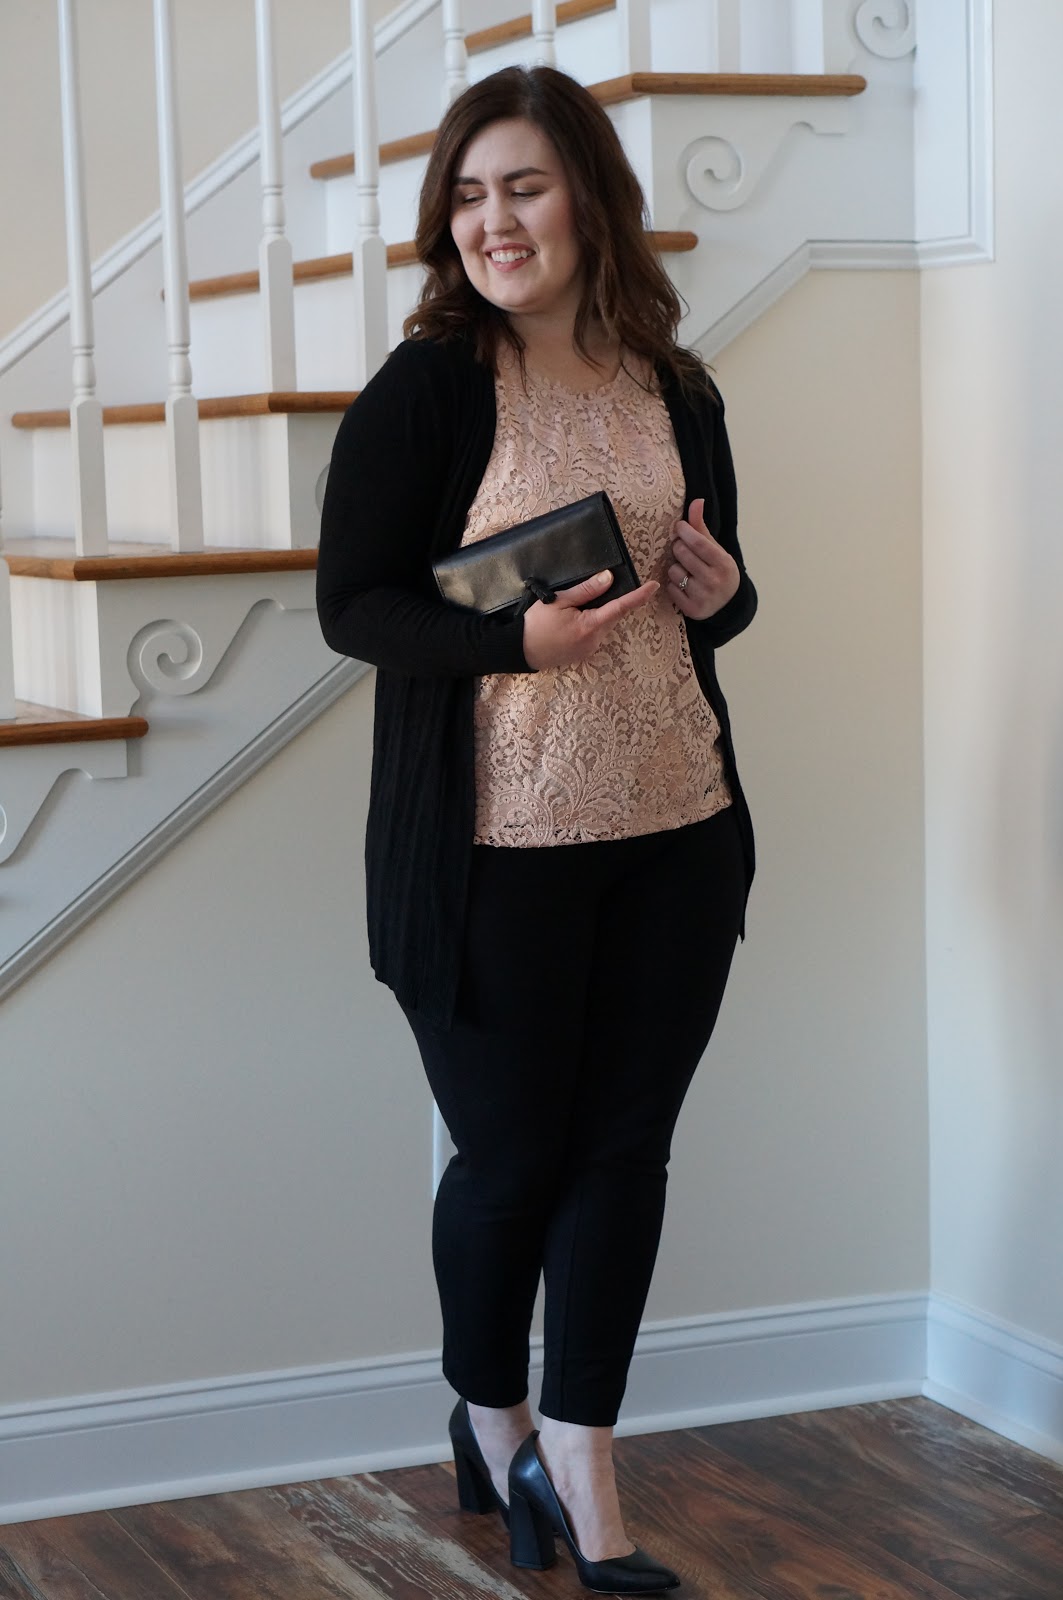 North Carolina style blogger Rebecca Lately shares her Valentine's Day look for work! Check it out here!